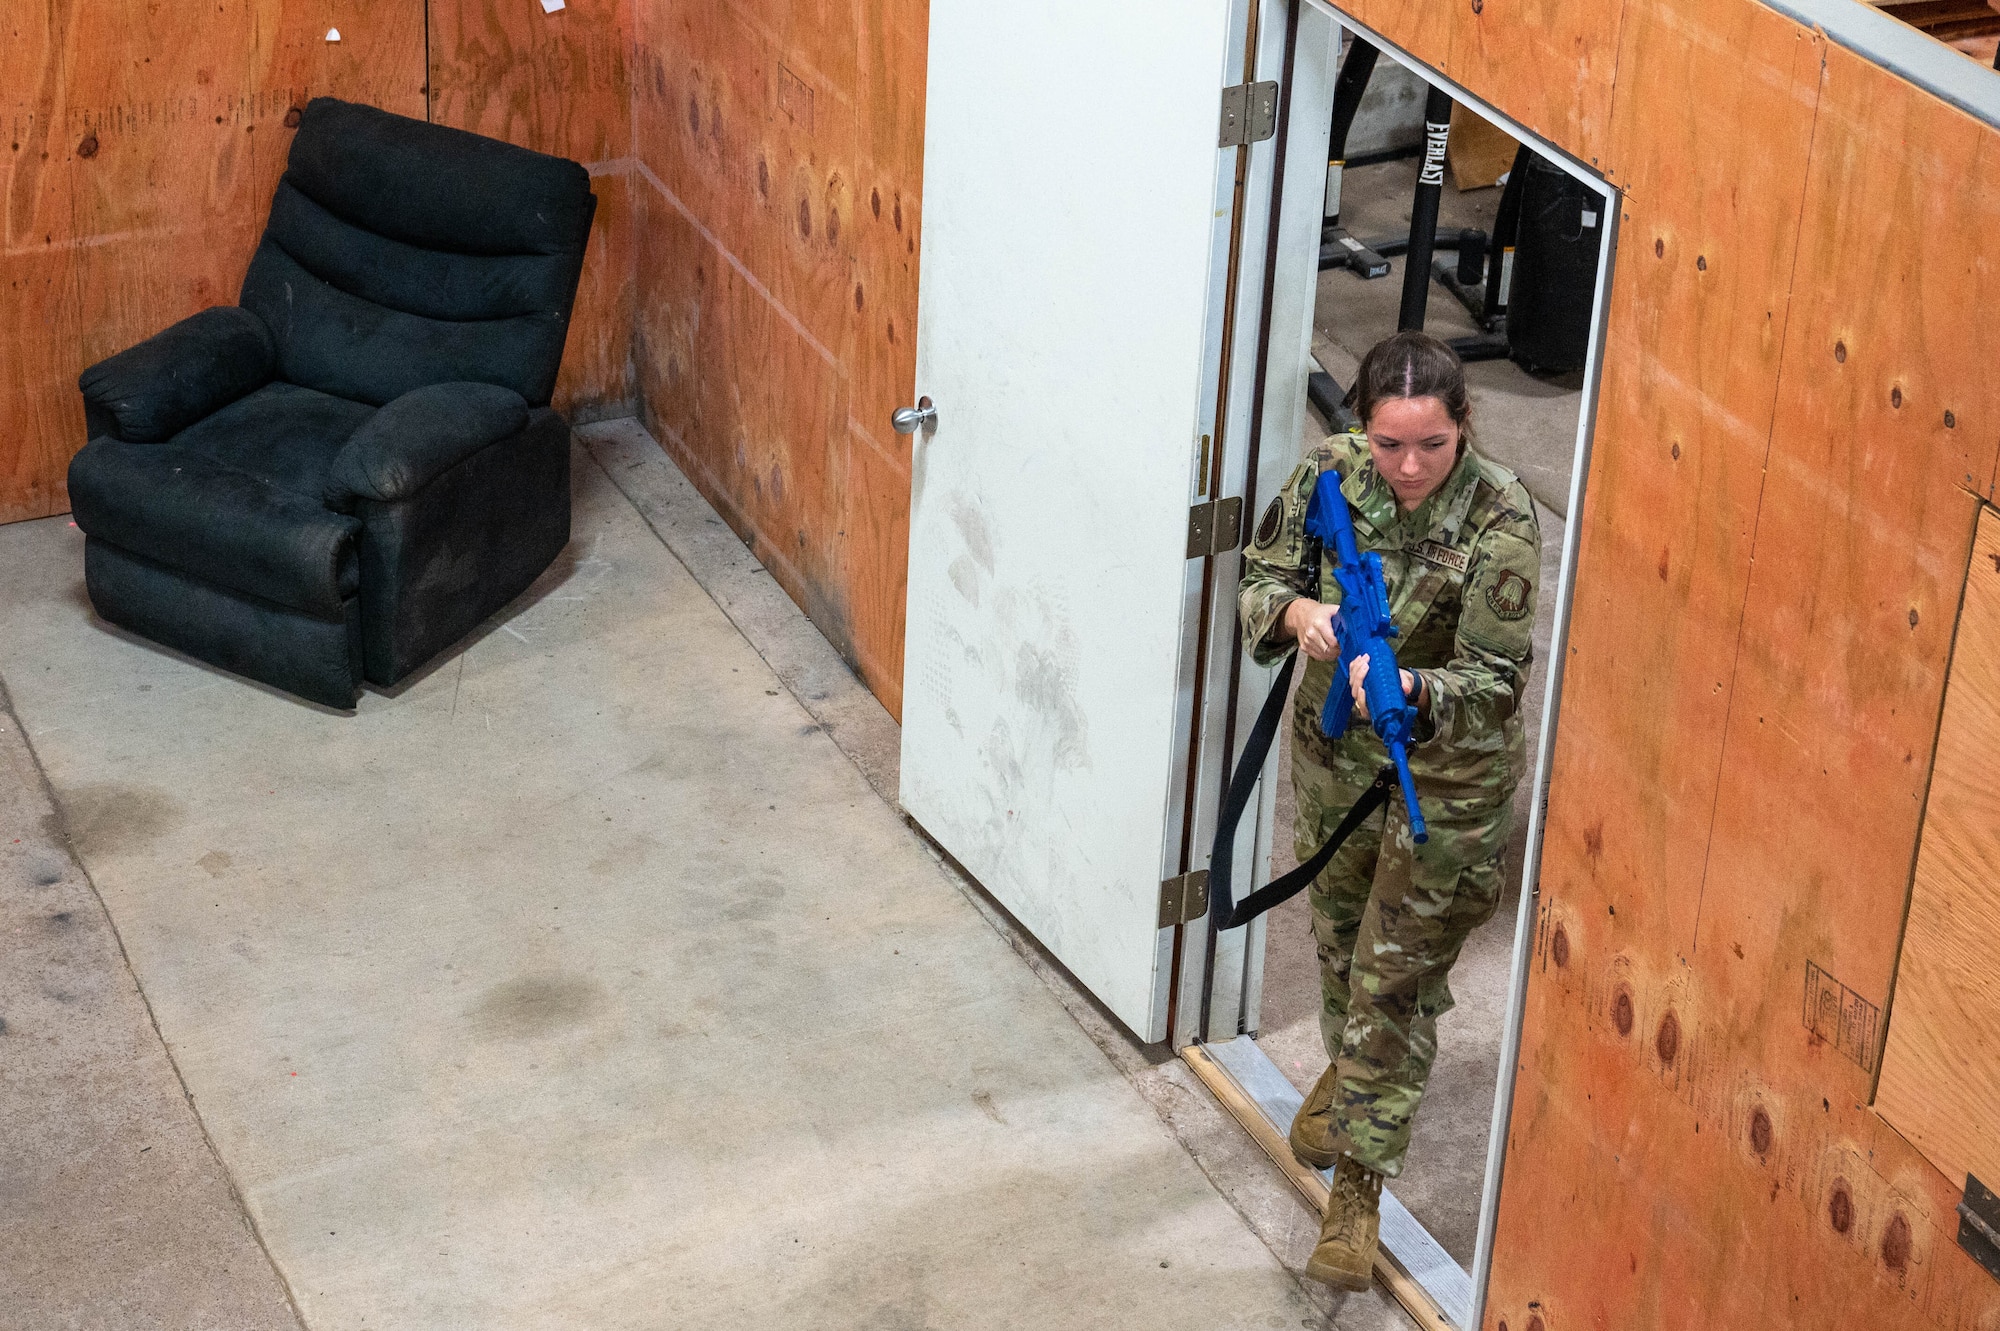 Madison Campos, Air Force ROTC cadet, enters a shoot house during a tour at Altus Air Force Base, Oklahoma, March 15, 2024. Campos gained hands-on experience using a rubber M-4 aid during the simulated exercise. (U.S. Air Force photo by Airman 1st Class Heidi Bucins)